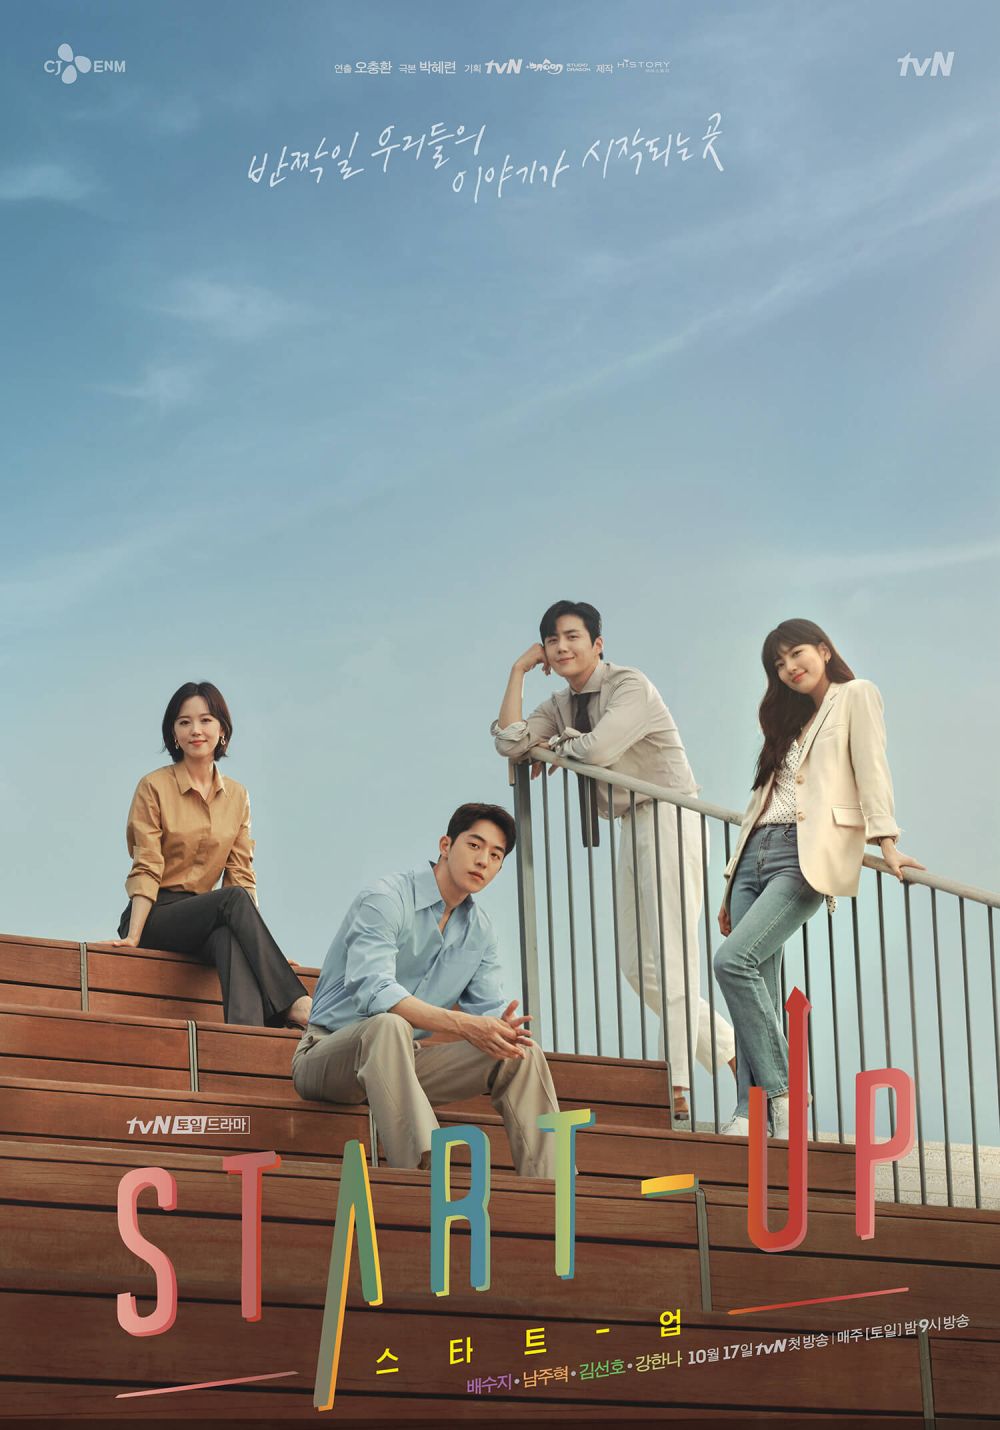 7 Recommended Korean Dramas for Those of You Who Like Twenty-Five, Twenty-One